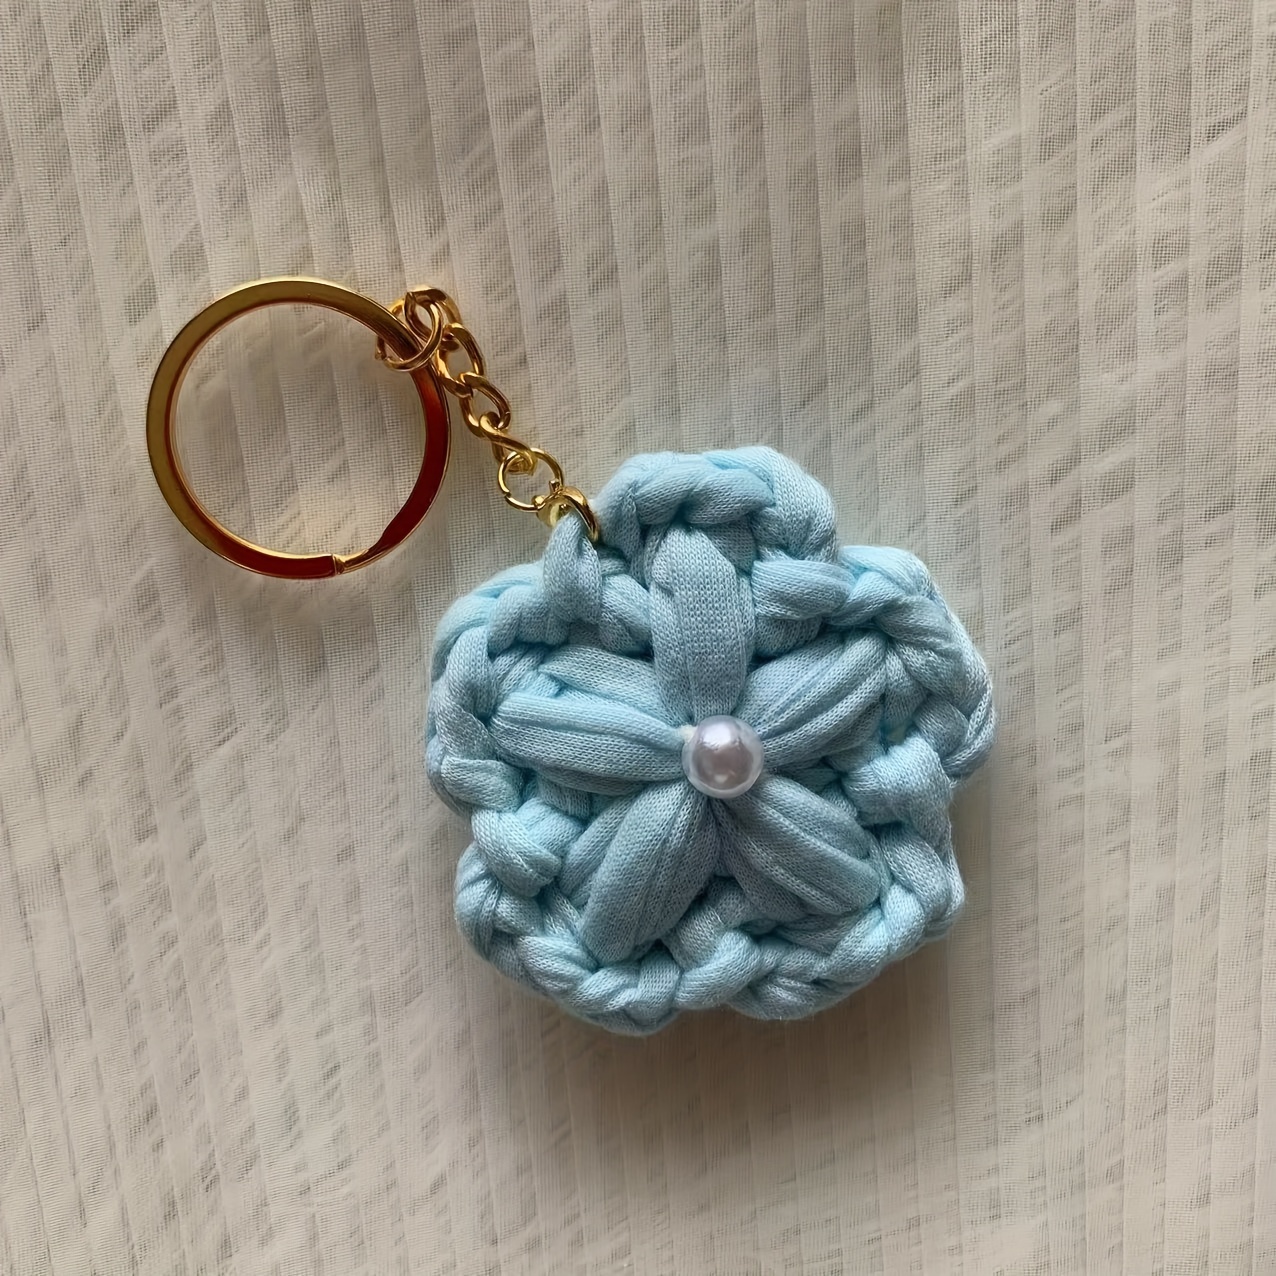 Cute Style Small Flower Keychain Personalized Fabric Imitation Cotton  Embroidery Schoolbag Pendant Bag Charm Gifts For Women